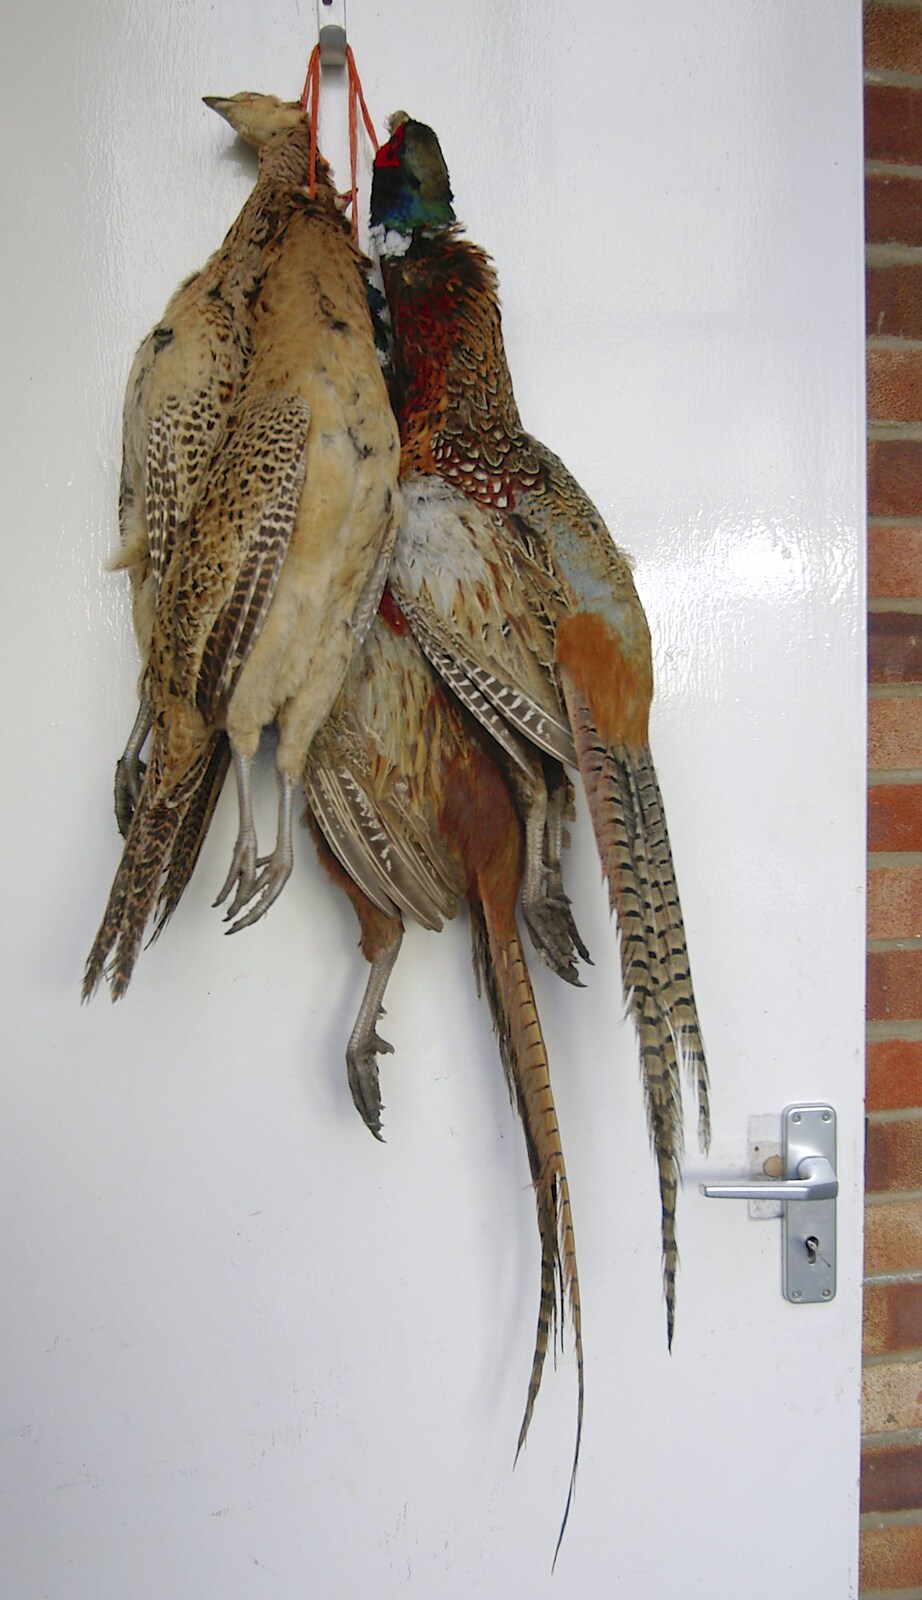 Pheasants hang on the door of Valley Farm from Pheasants, Sunsets and The BBs at Bressingham, Norfolk - 11th December 2005